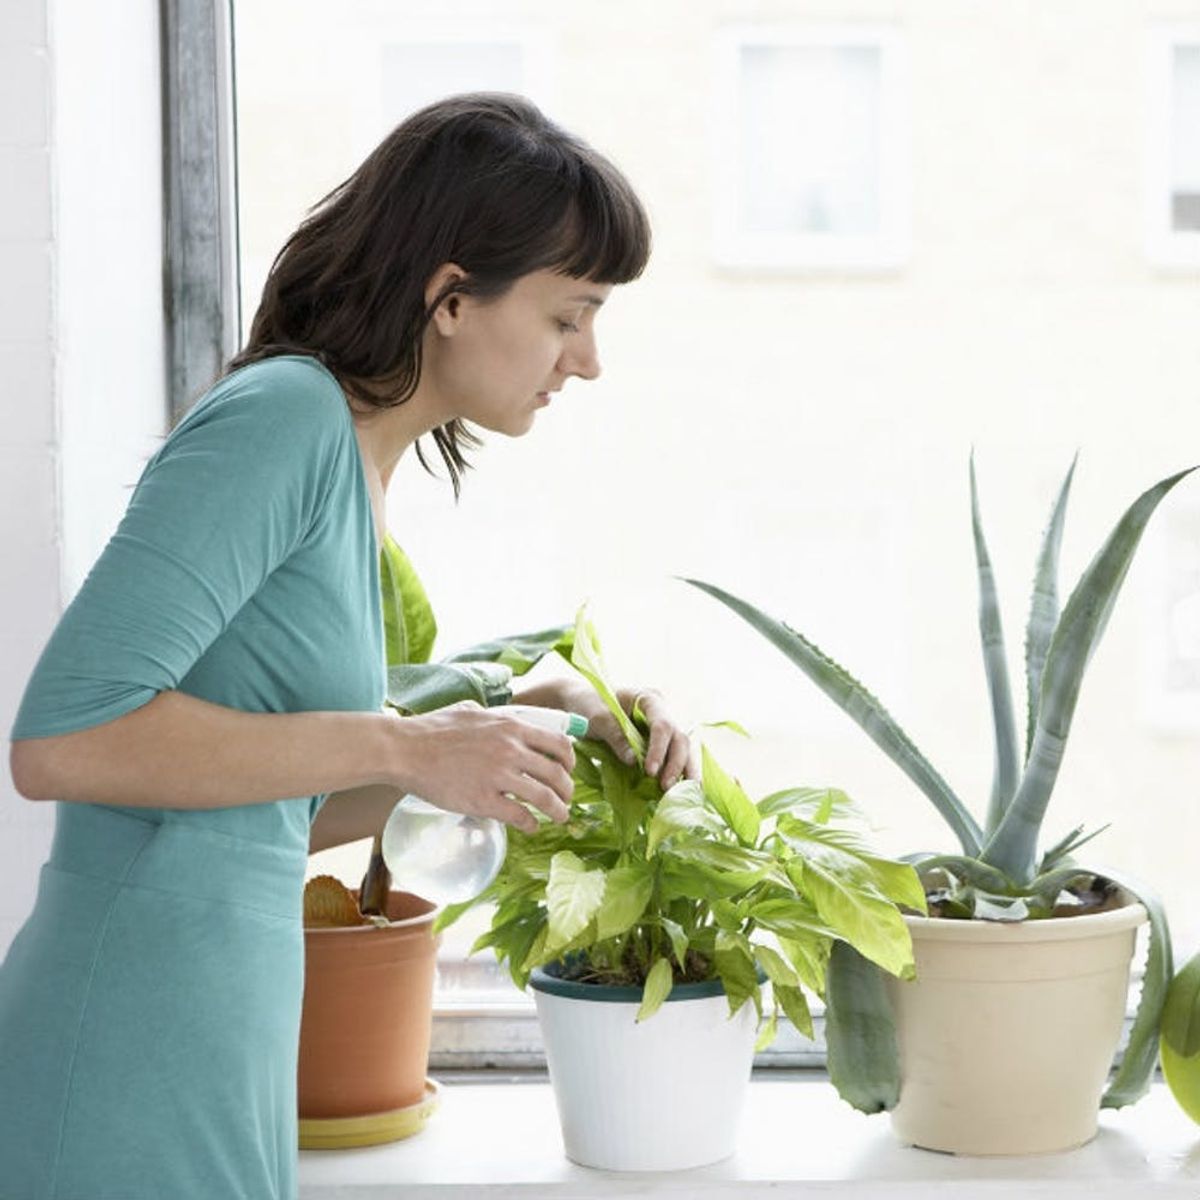 11 House Plants So Good for You They’re Approved by NASA